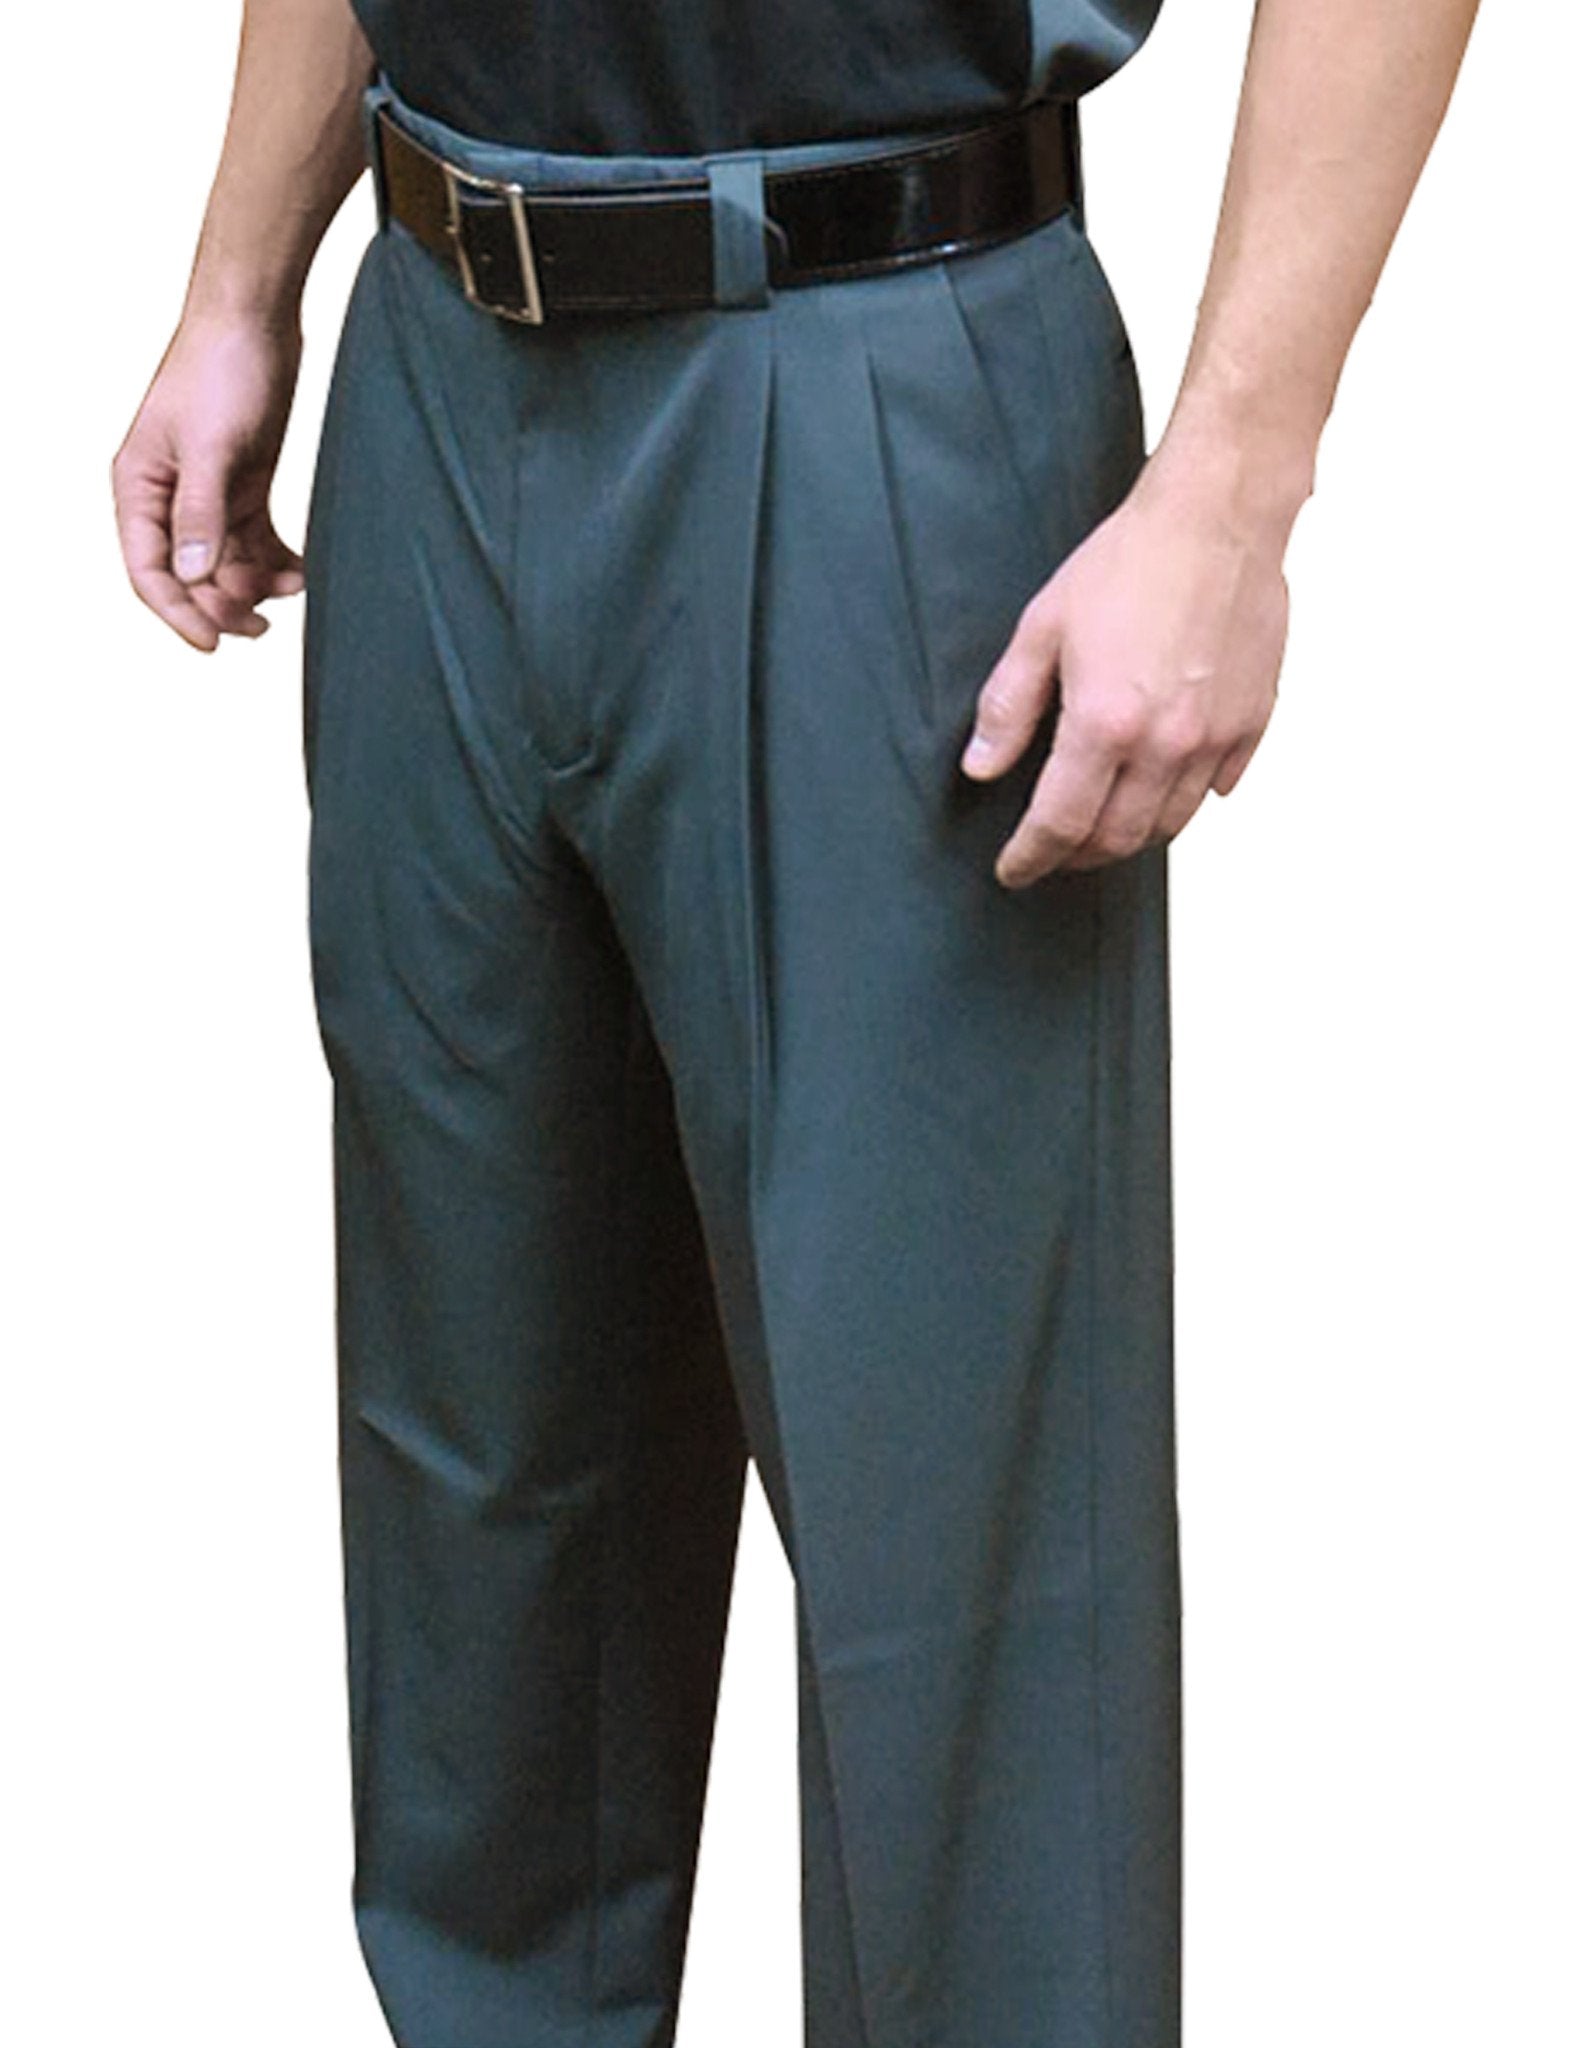 BBS355HG - NEW Men's Smitty 4-Way Stretch FLAT FRONT PLATE PANTS w –  Smitty Officials Apparel